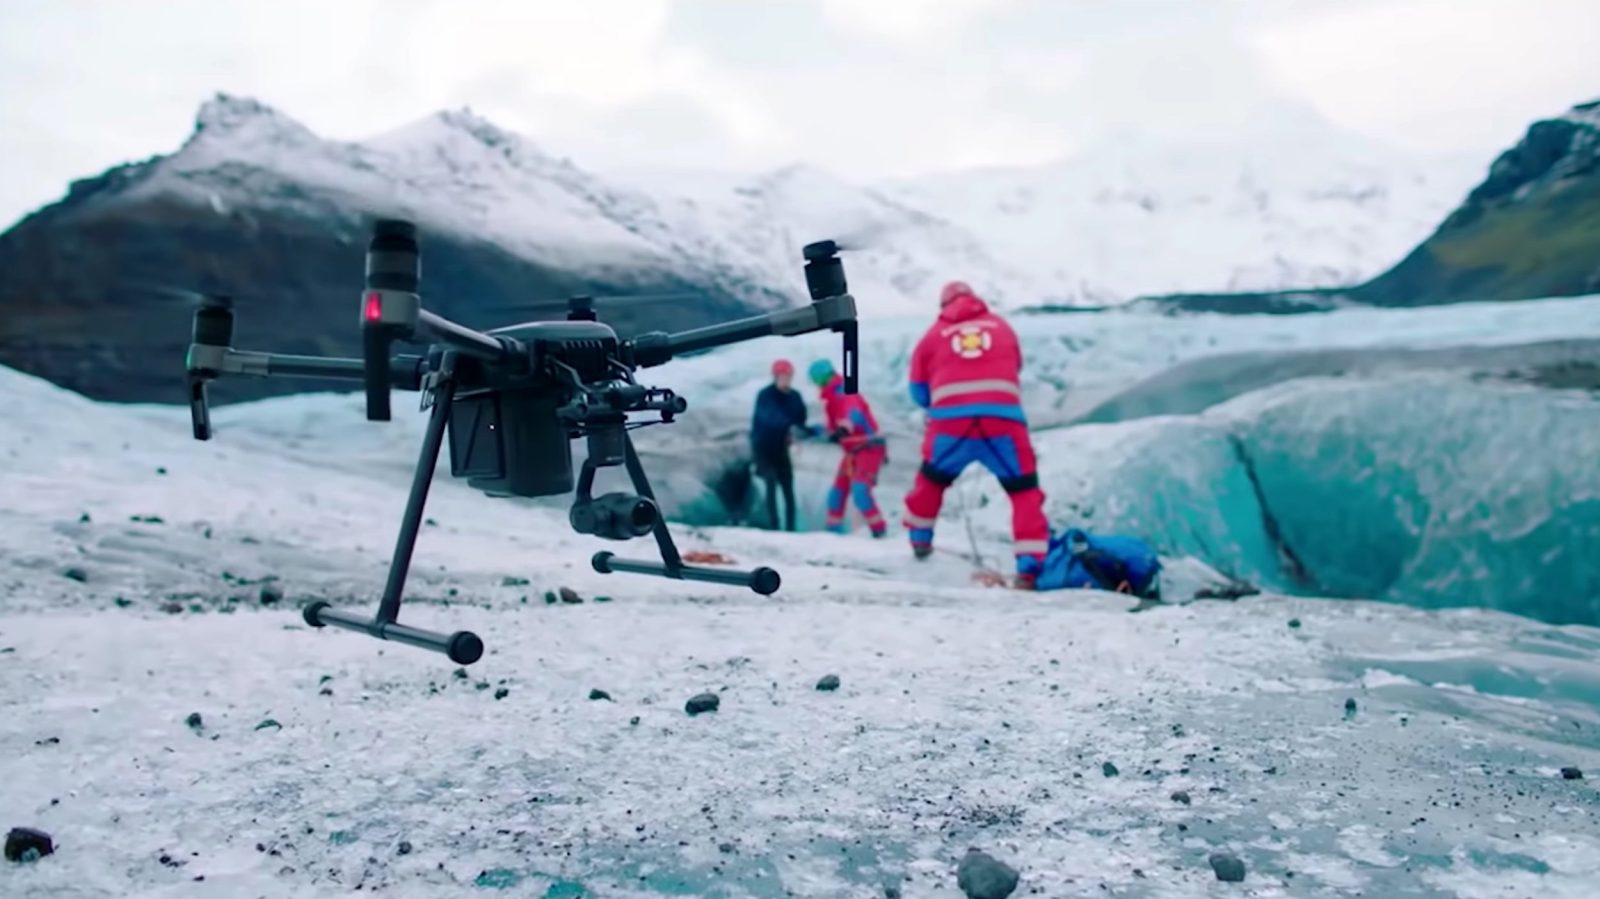 In a video, DJI shows how the five AUVSI XCELLENCE Humanitarian Awardees use drones for good.